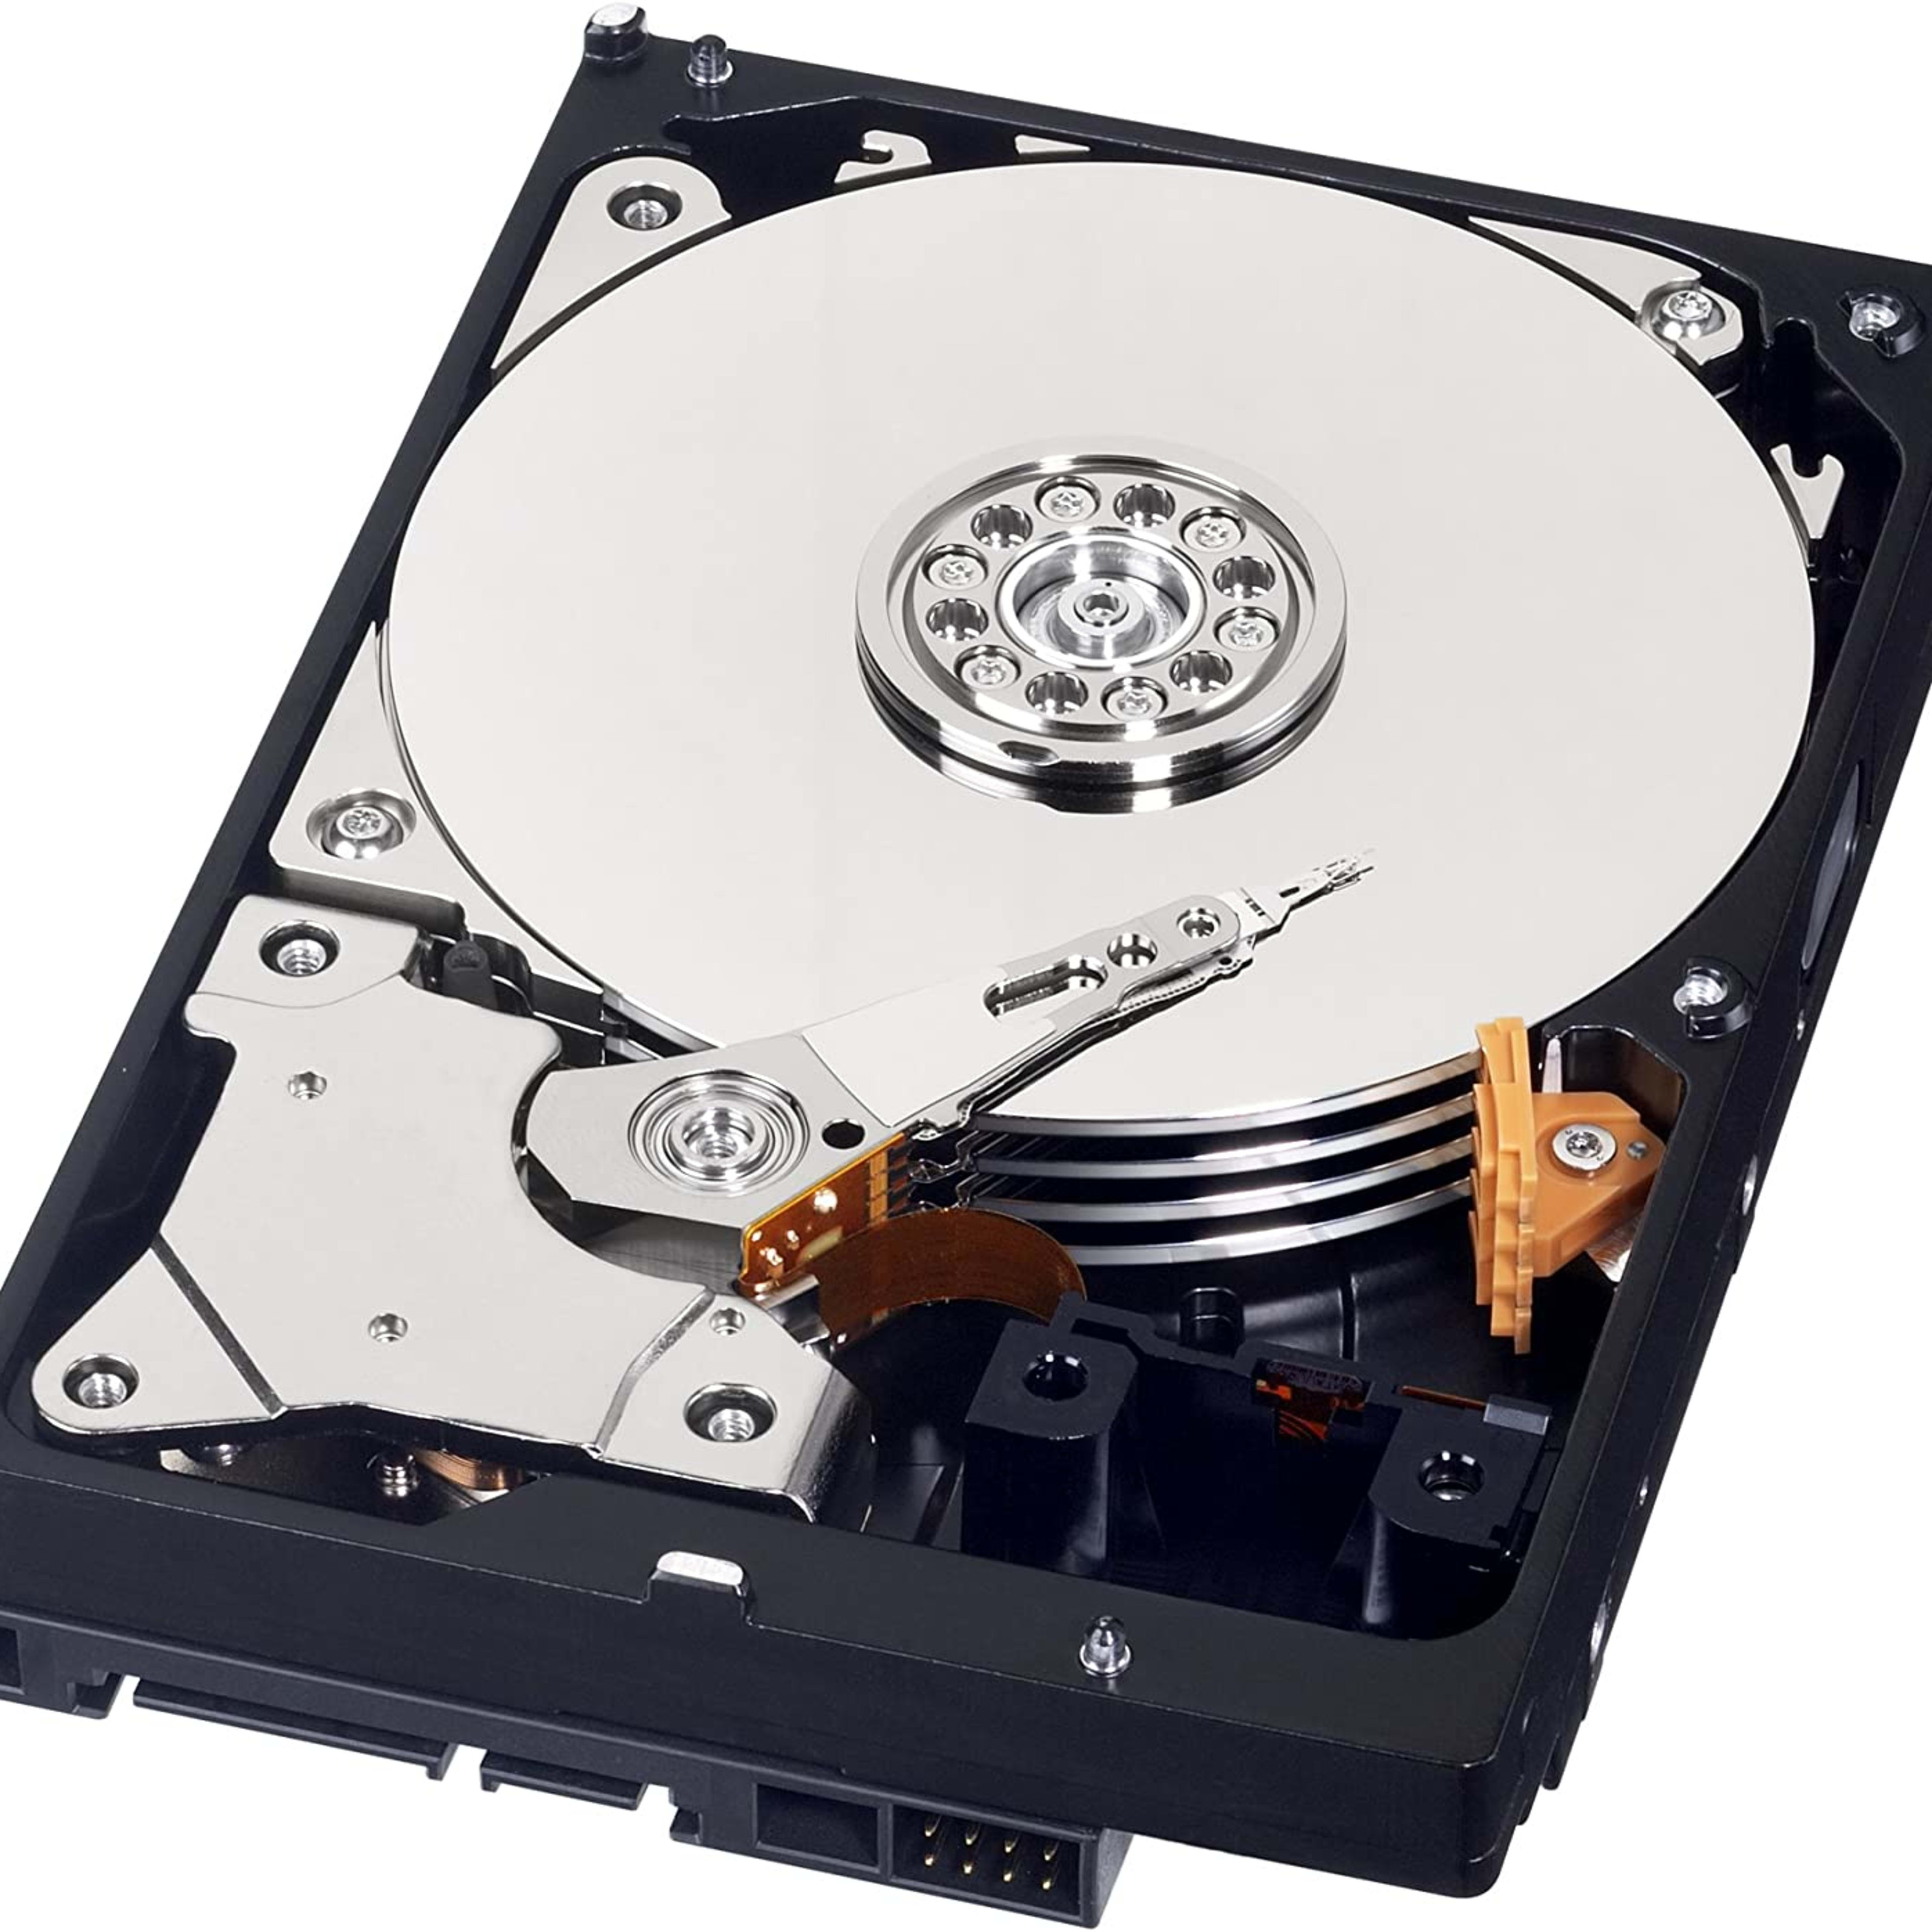 Excess inventory WD Blue 500GB Desktop Hard Disk Drive - 7200 RPM SATA 6 Gb/s 16MB Cache 3.5 Inch